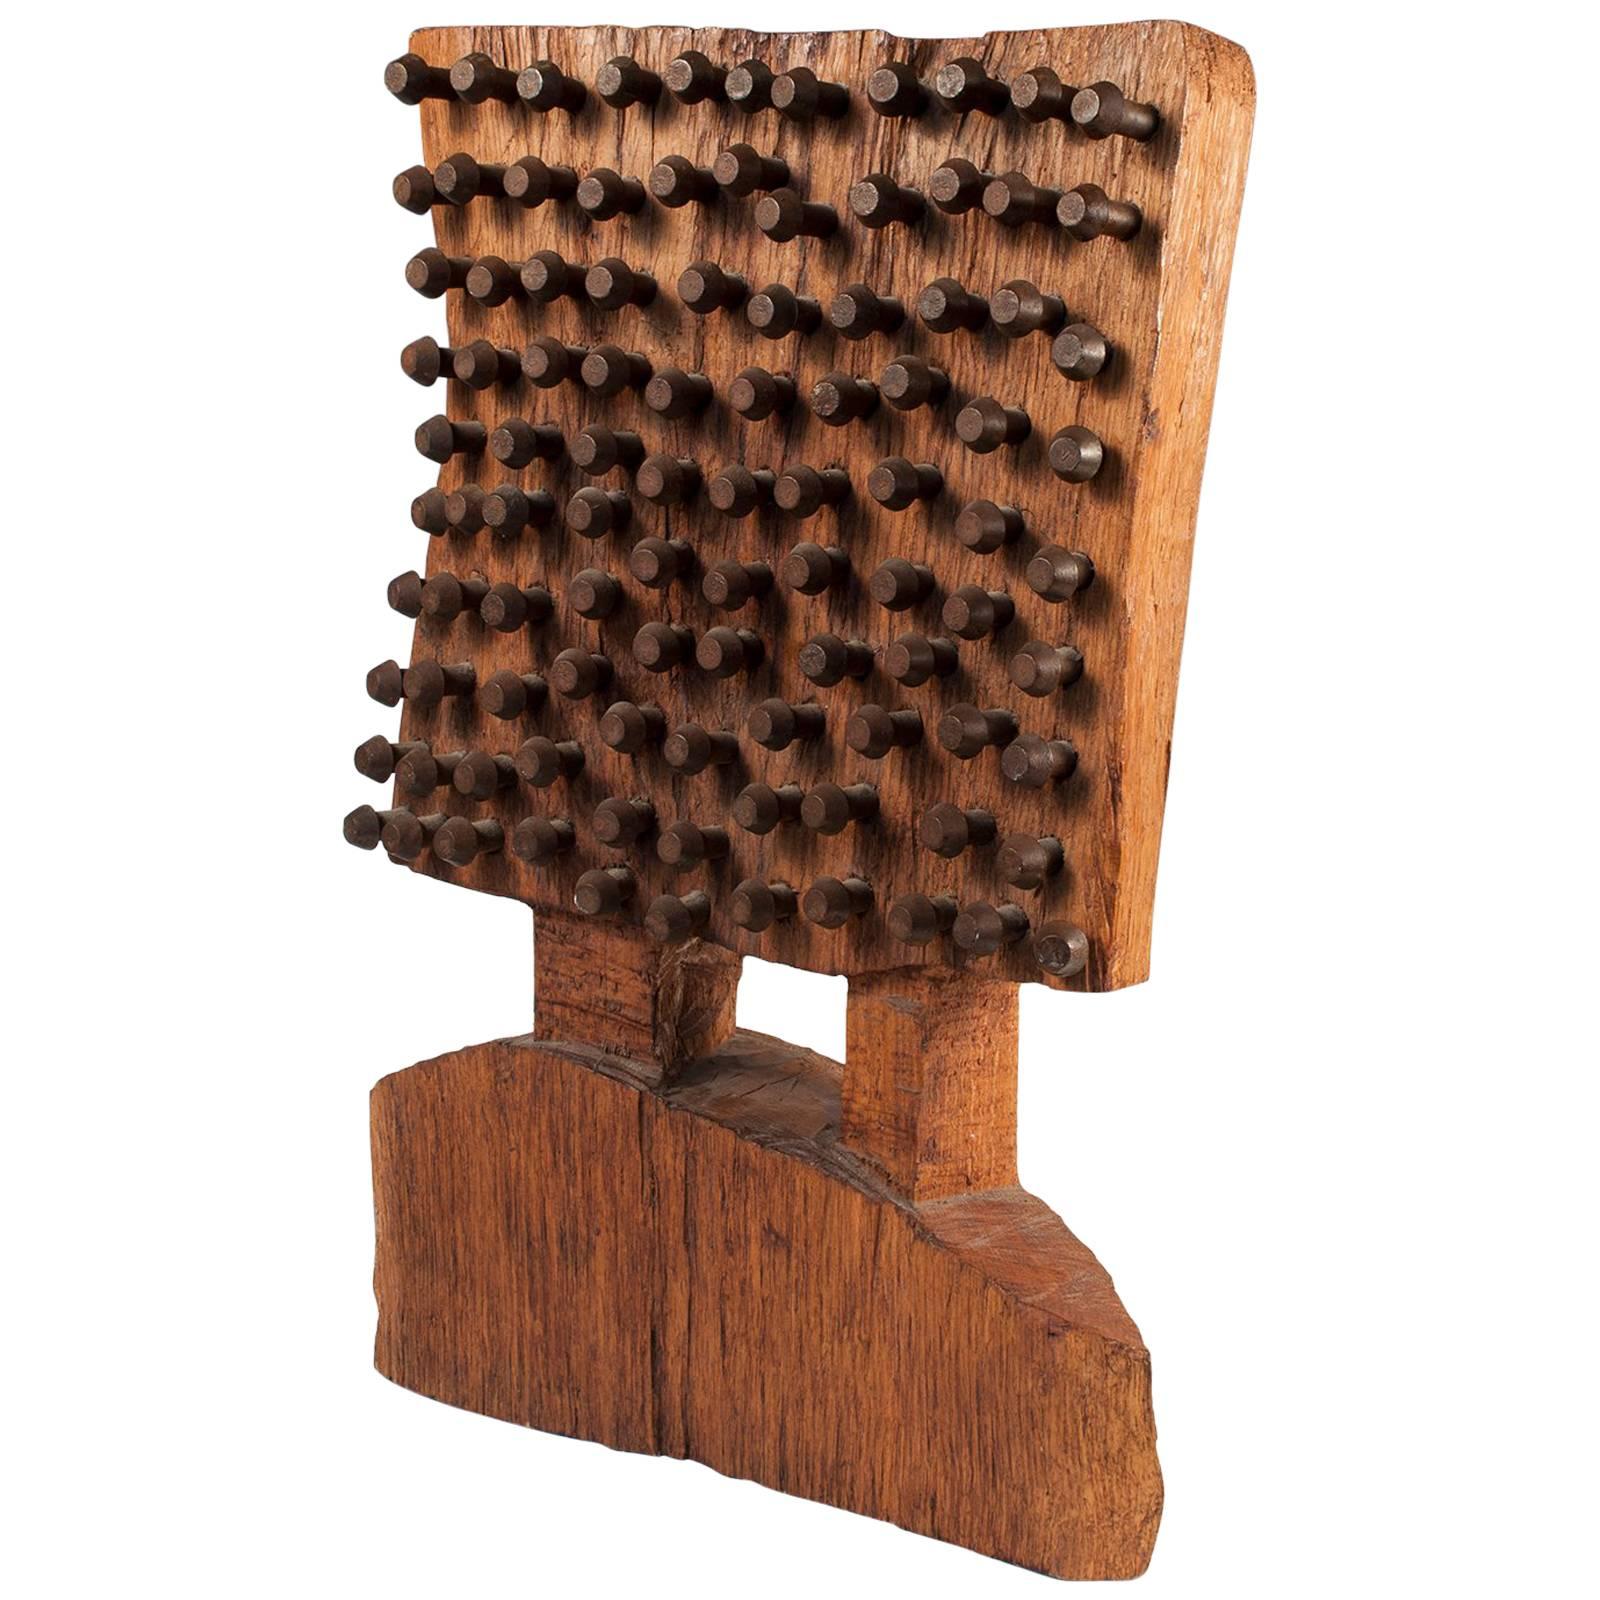 Midcentury Wood, Stud and Nail Brutalist Sculpture by an Unknown Artist